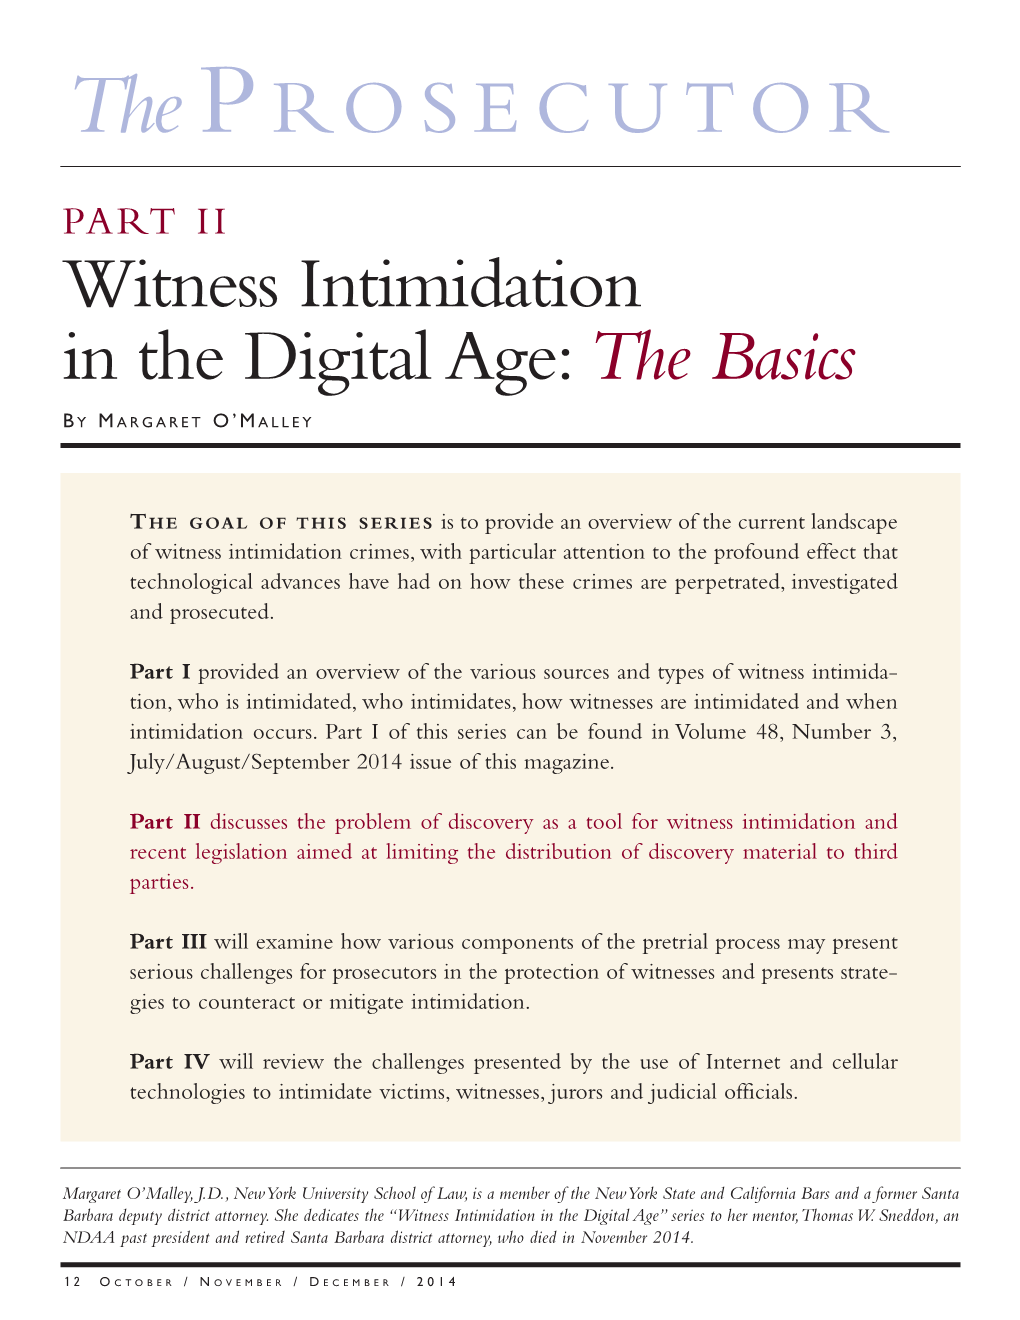 Witness Intimidation in the Digital Age: the Basics